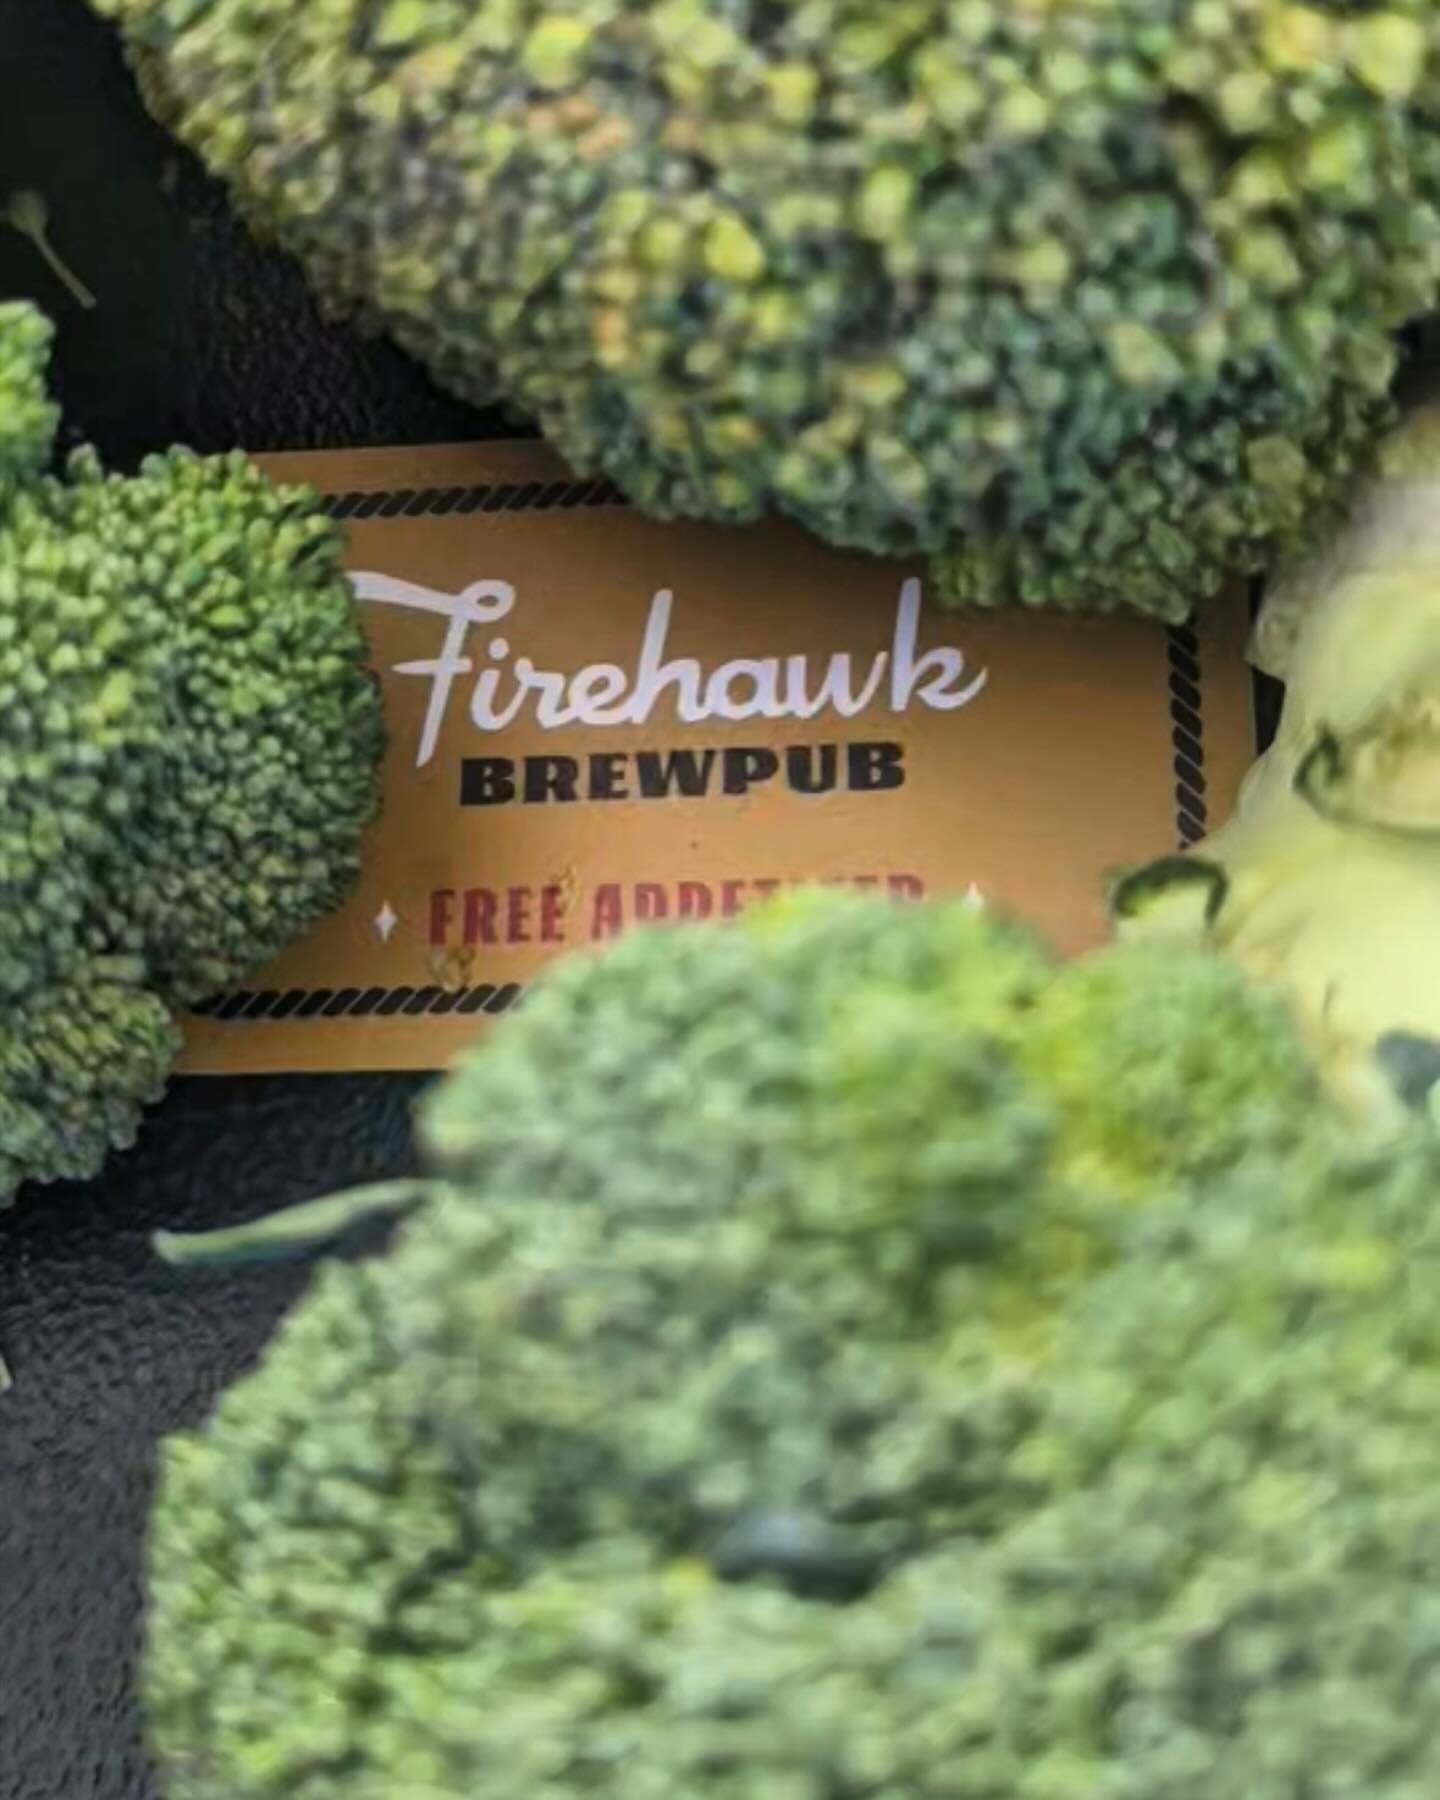 Good morning Mount Holly! Get to the Farmer&rsquo;s Market and look out for Firehawk gift cards hiding amongst the fresh, farmer-grown goods. Tomorrow&rsquo;s brunch specials will come straight from the market, so look out for those too! It&rsquo;s g